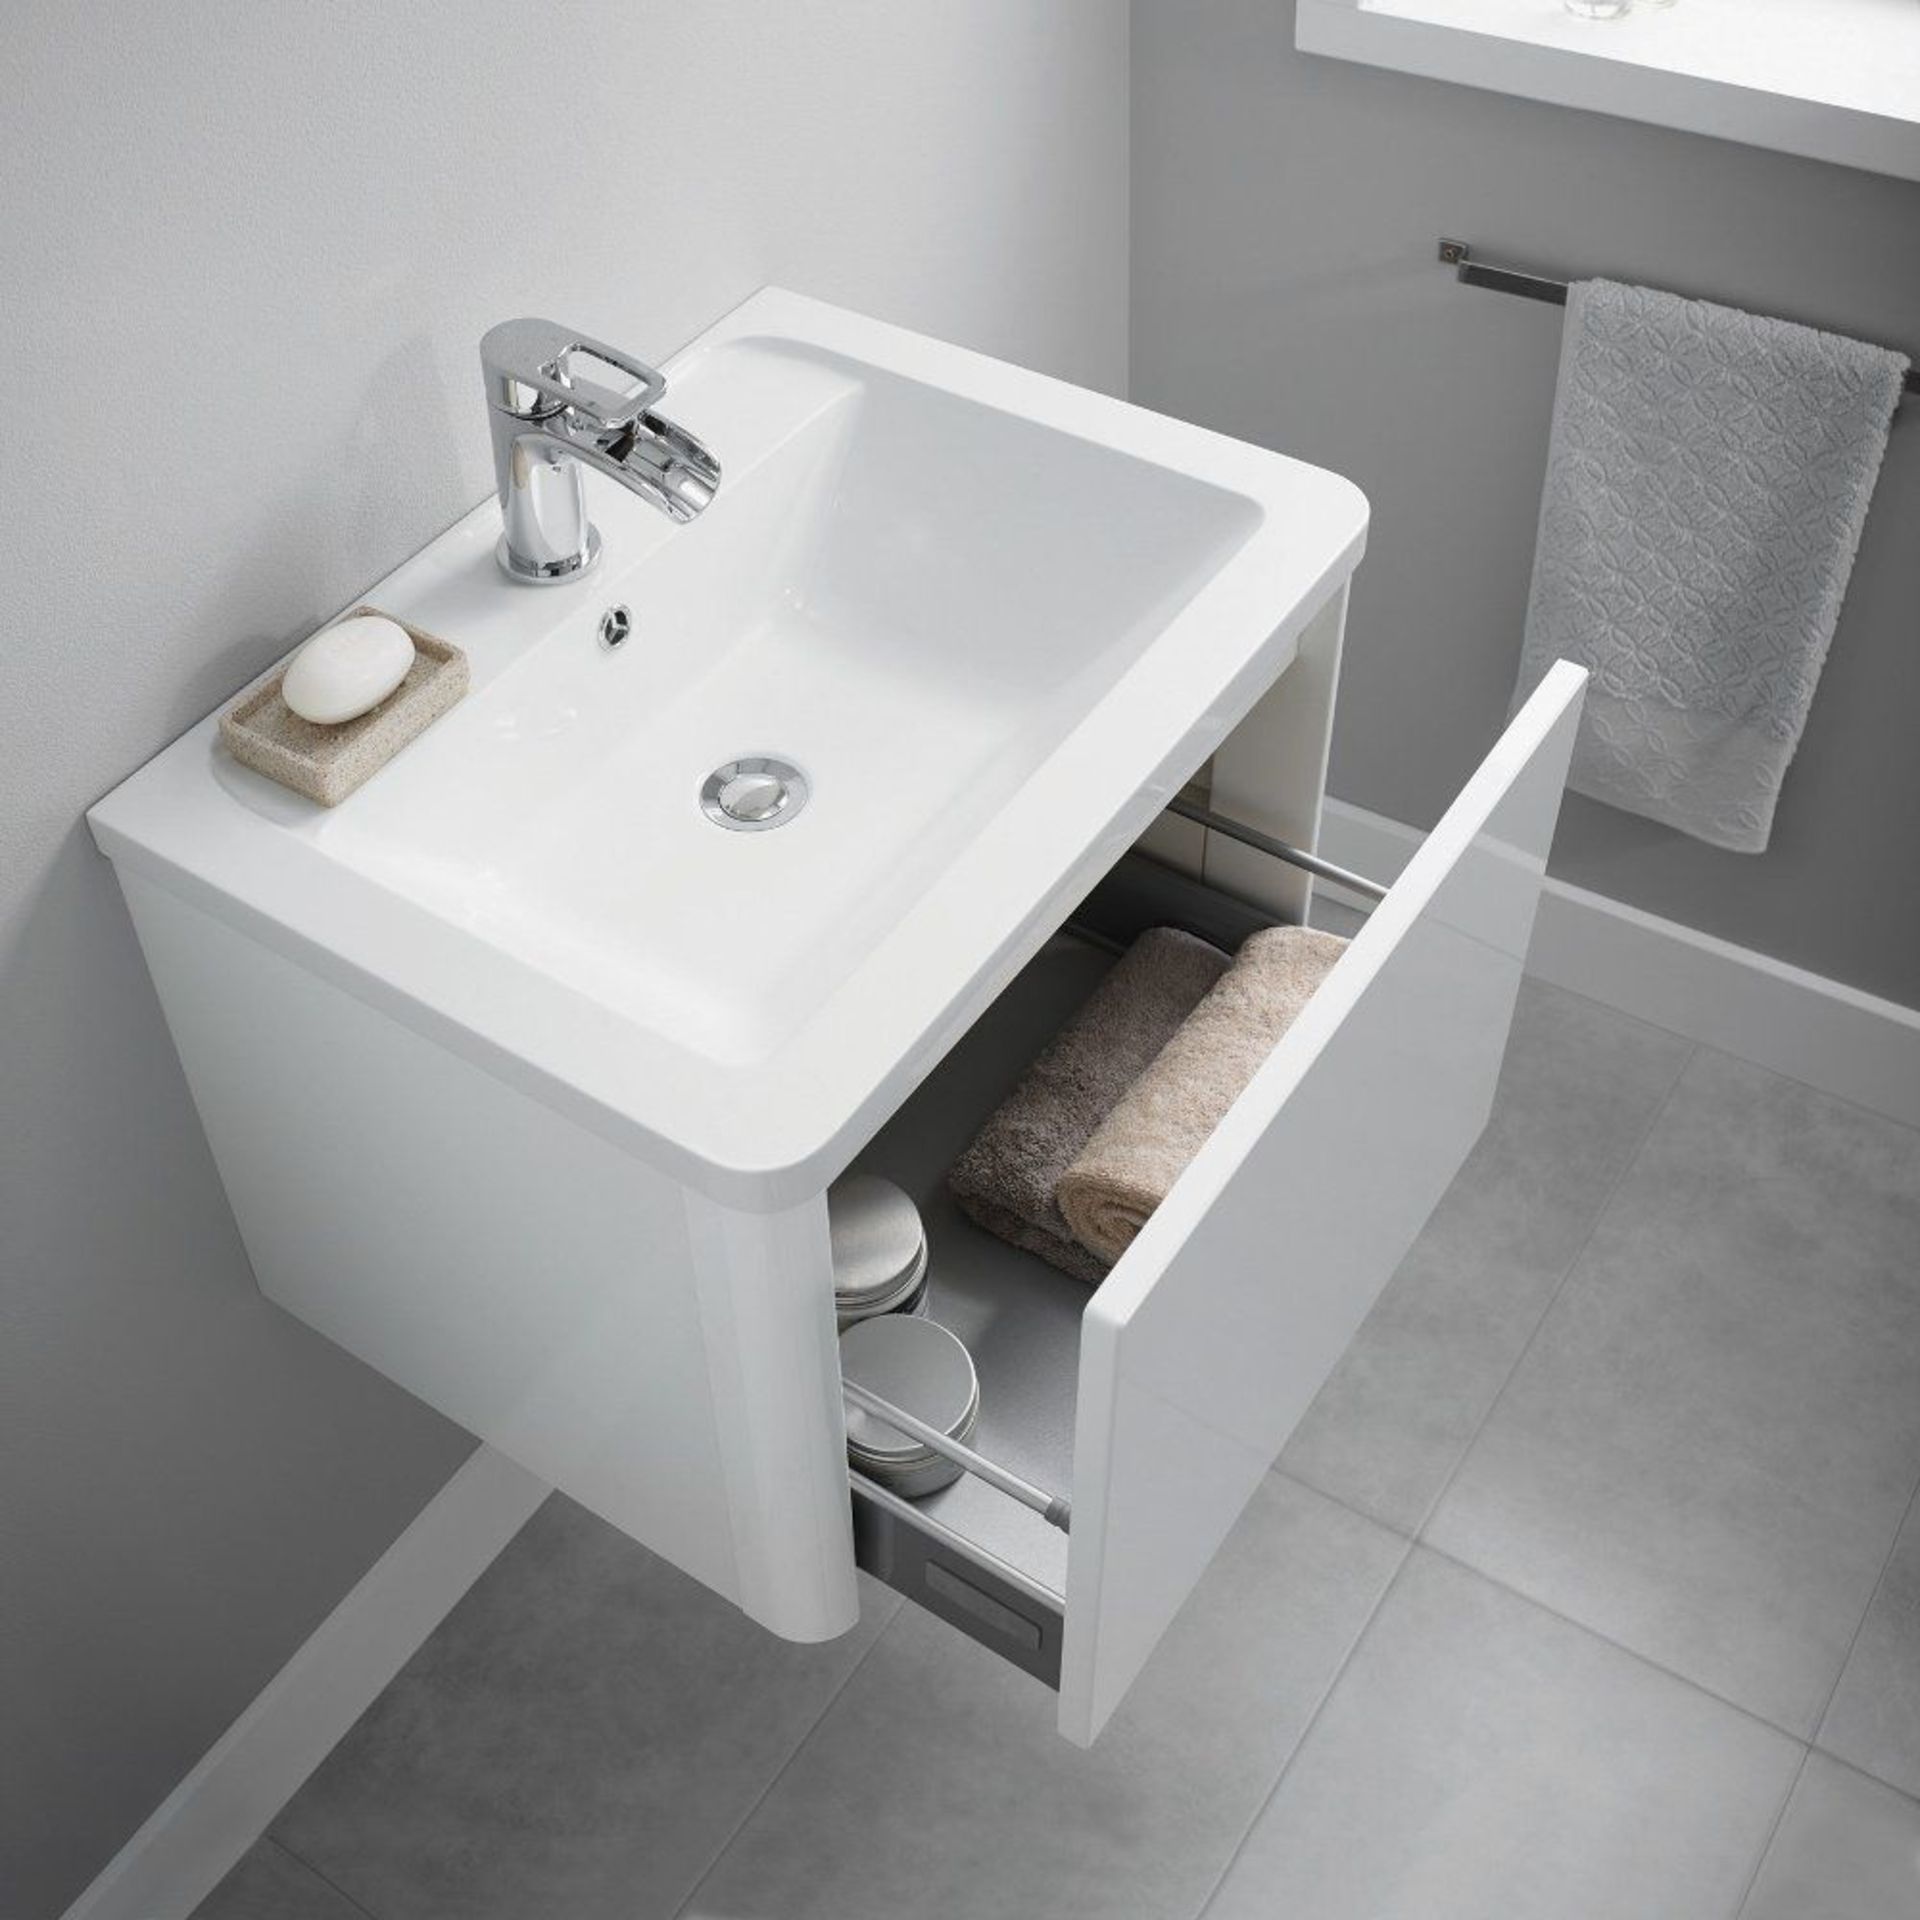 NEW (M156) Lambra 600mm 2 Drawer Wall Hung Vanity Unit - White. RRP £499.99.COMES COMPLETE W... - Image 2 of 3